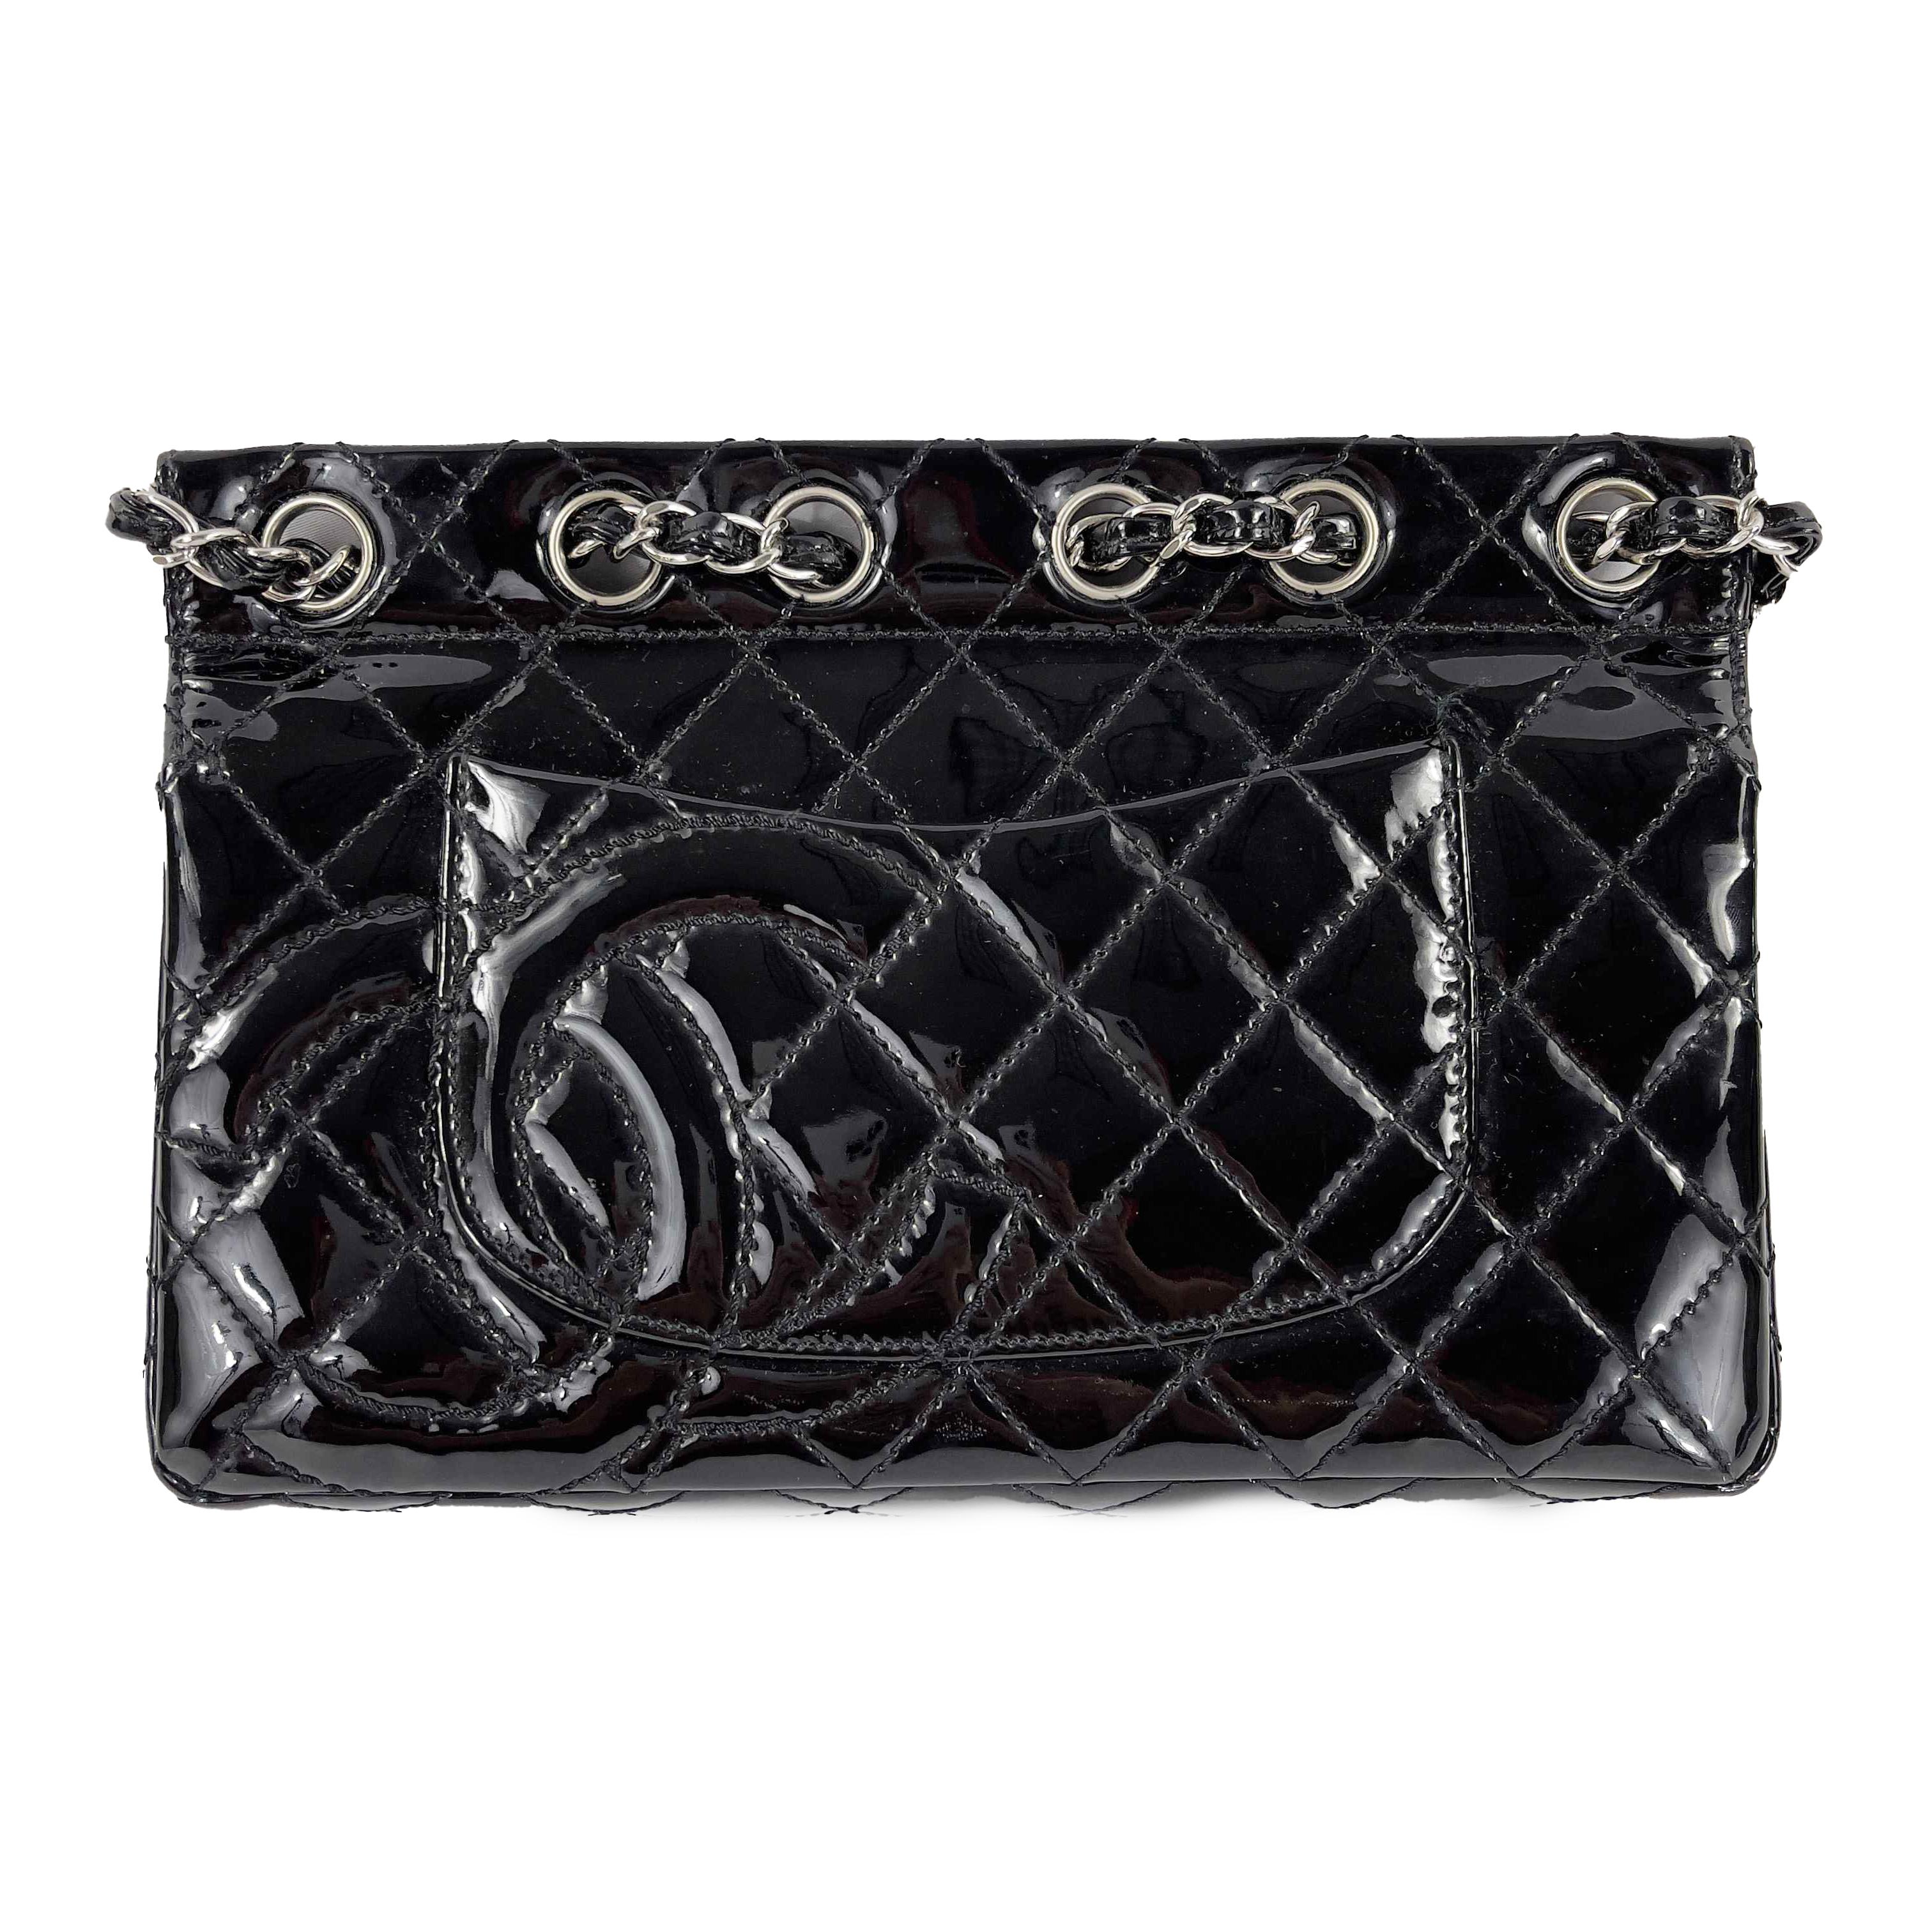 CHANEL 05 Patent Chain Through Flap Bag Quilted - Black / Silver-tone Crossbody

Description

* 2005 Collection
* Seen on Victoria Beckham.
* Patent leather.
* Silver tone hardware.
* Threaded shoulder chain that can be doubled.
* Interior zip